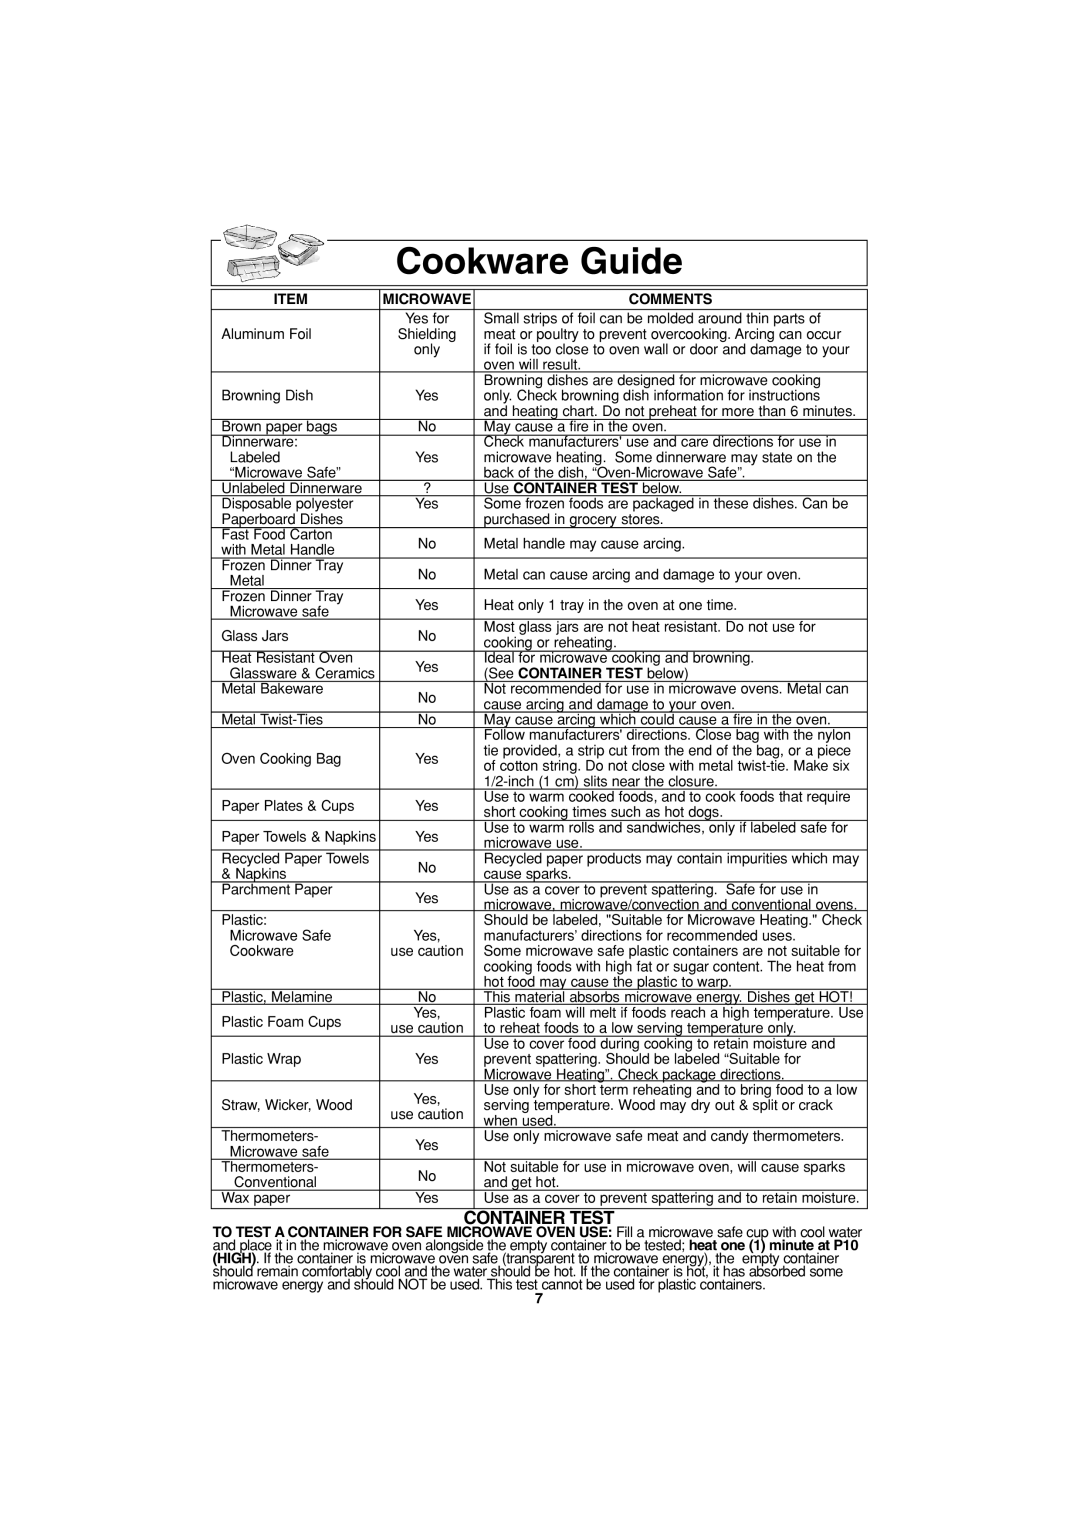 Panasonic NN-T993, NN-T793 operating instructions Cookware Guide, Container Test 